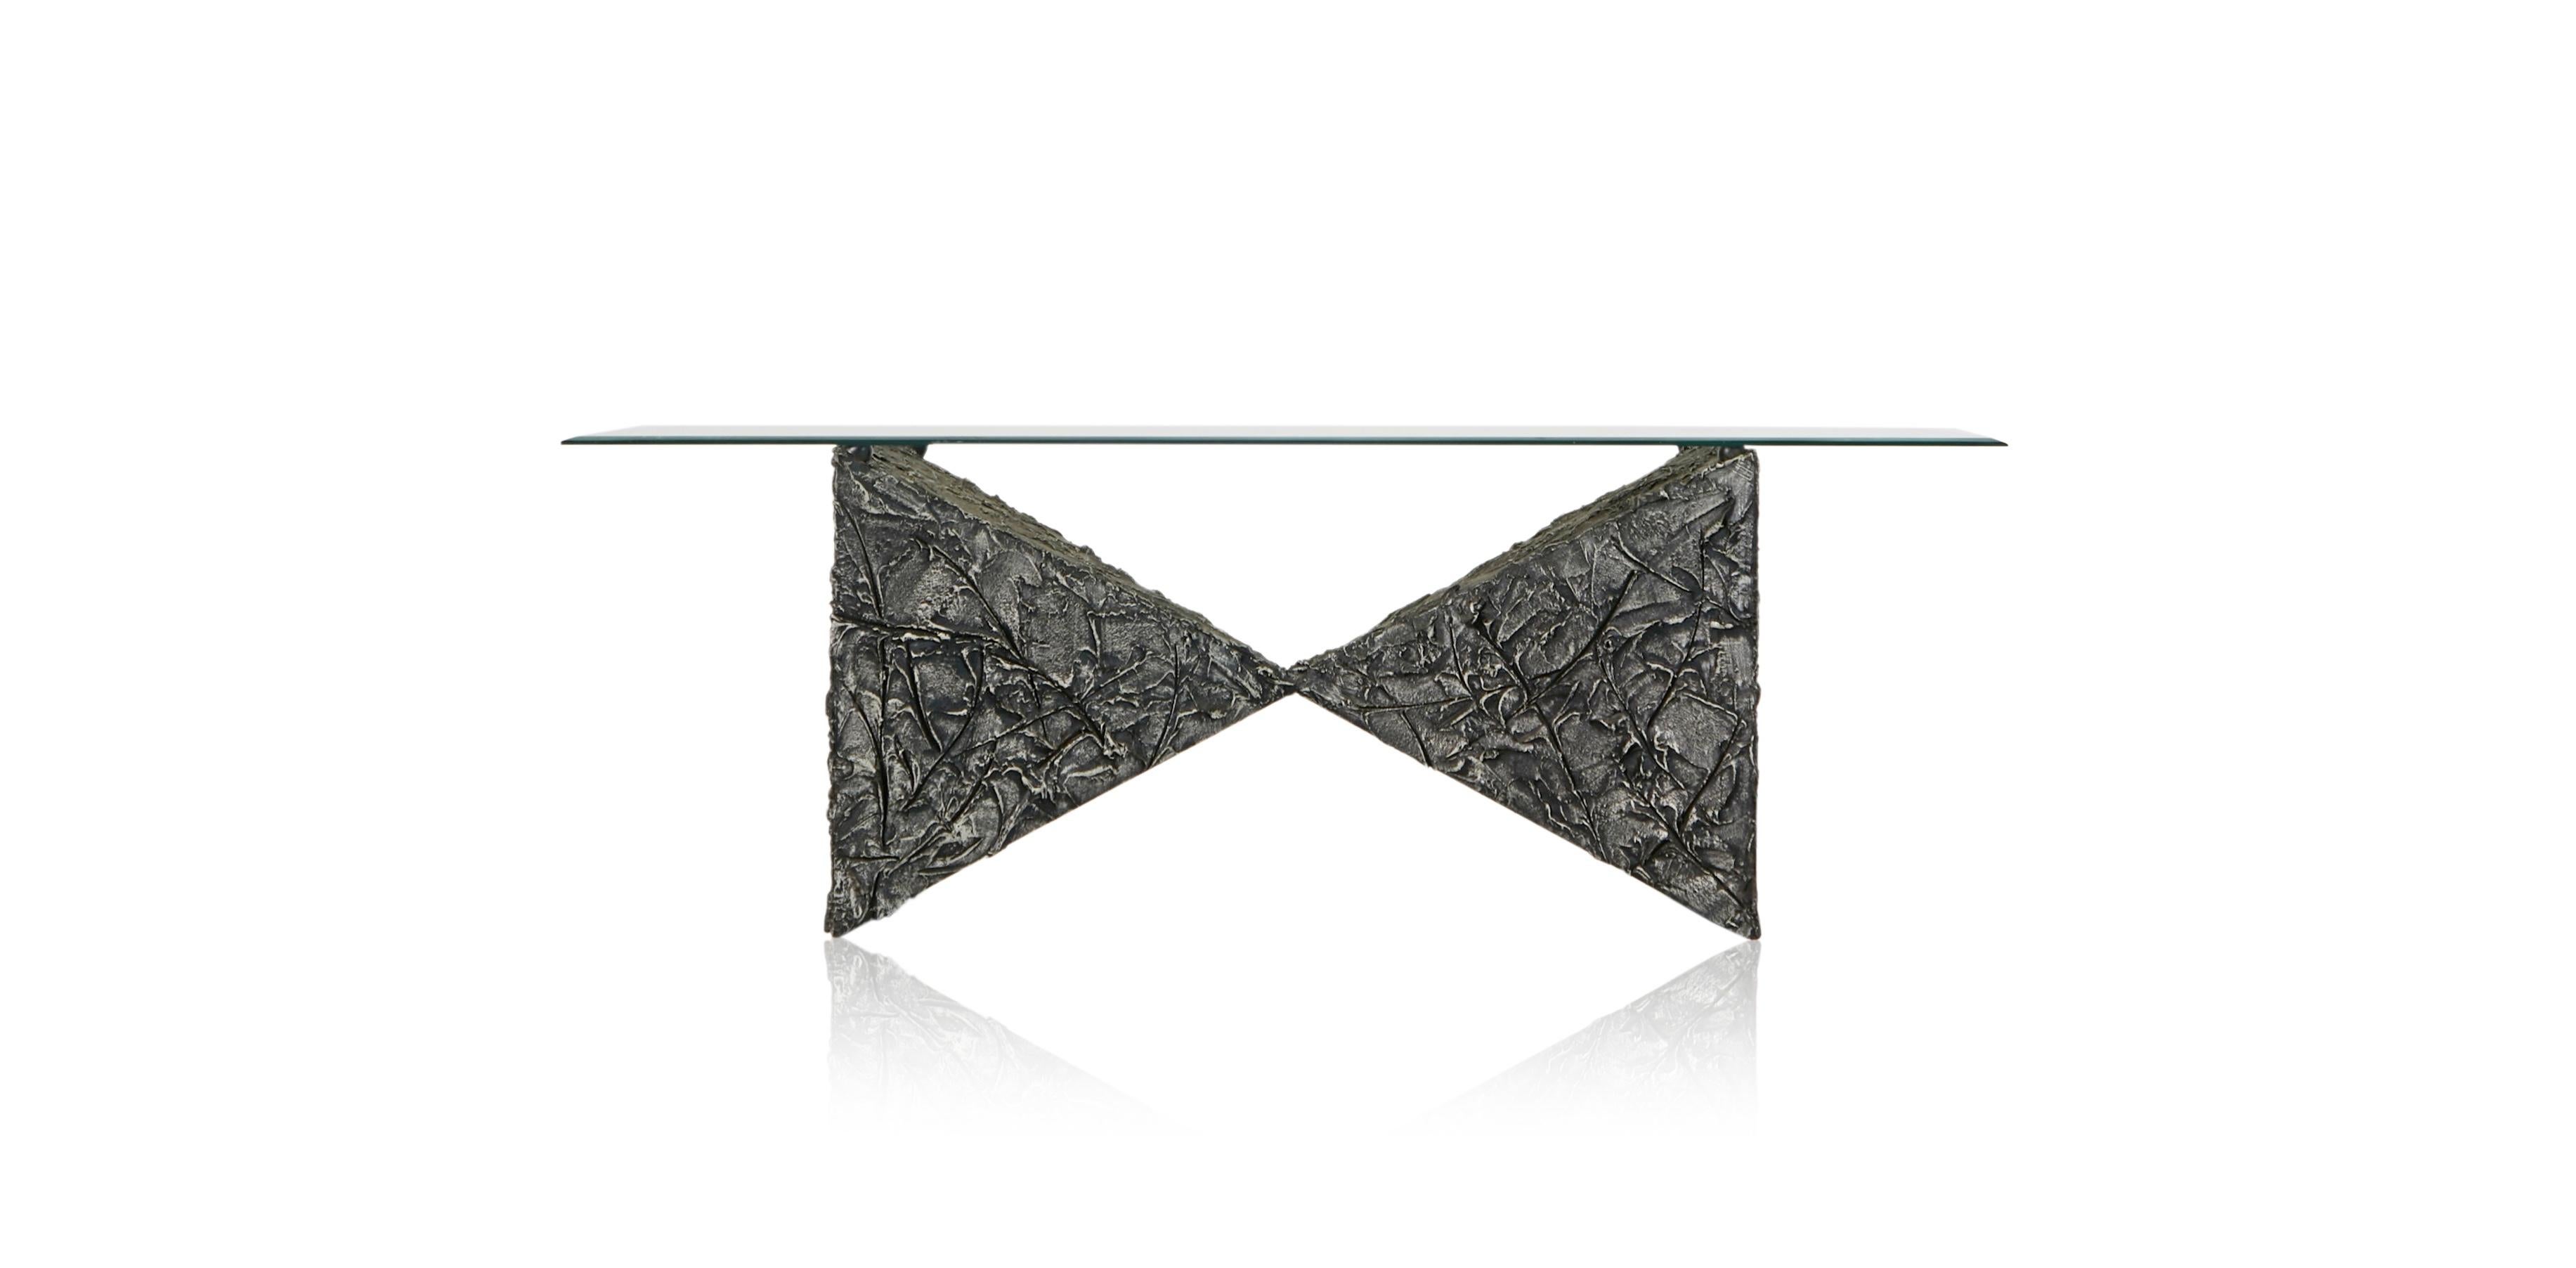 Brutalist coffee table by Adrian Pearsall for Craft Associates. This amazingly cool looking cocktail table features a sculptural base formed of two pyramid shapes which connect together their peaks - and to the viewers amazement, is quite strong